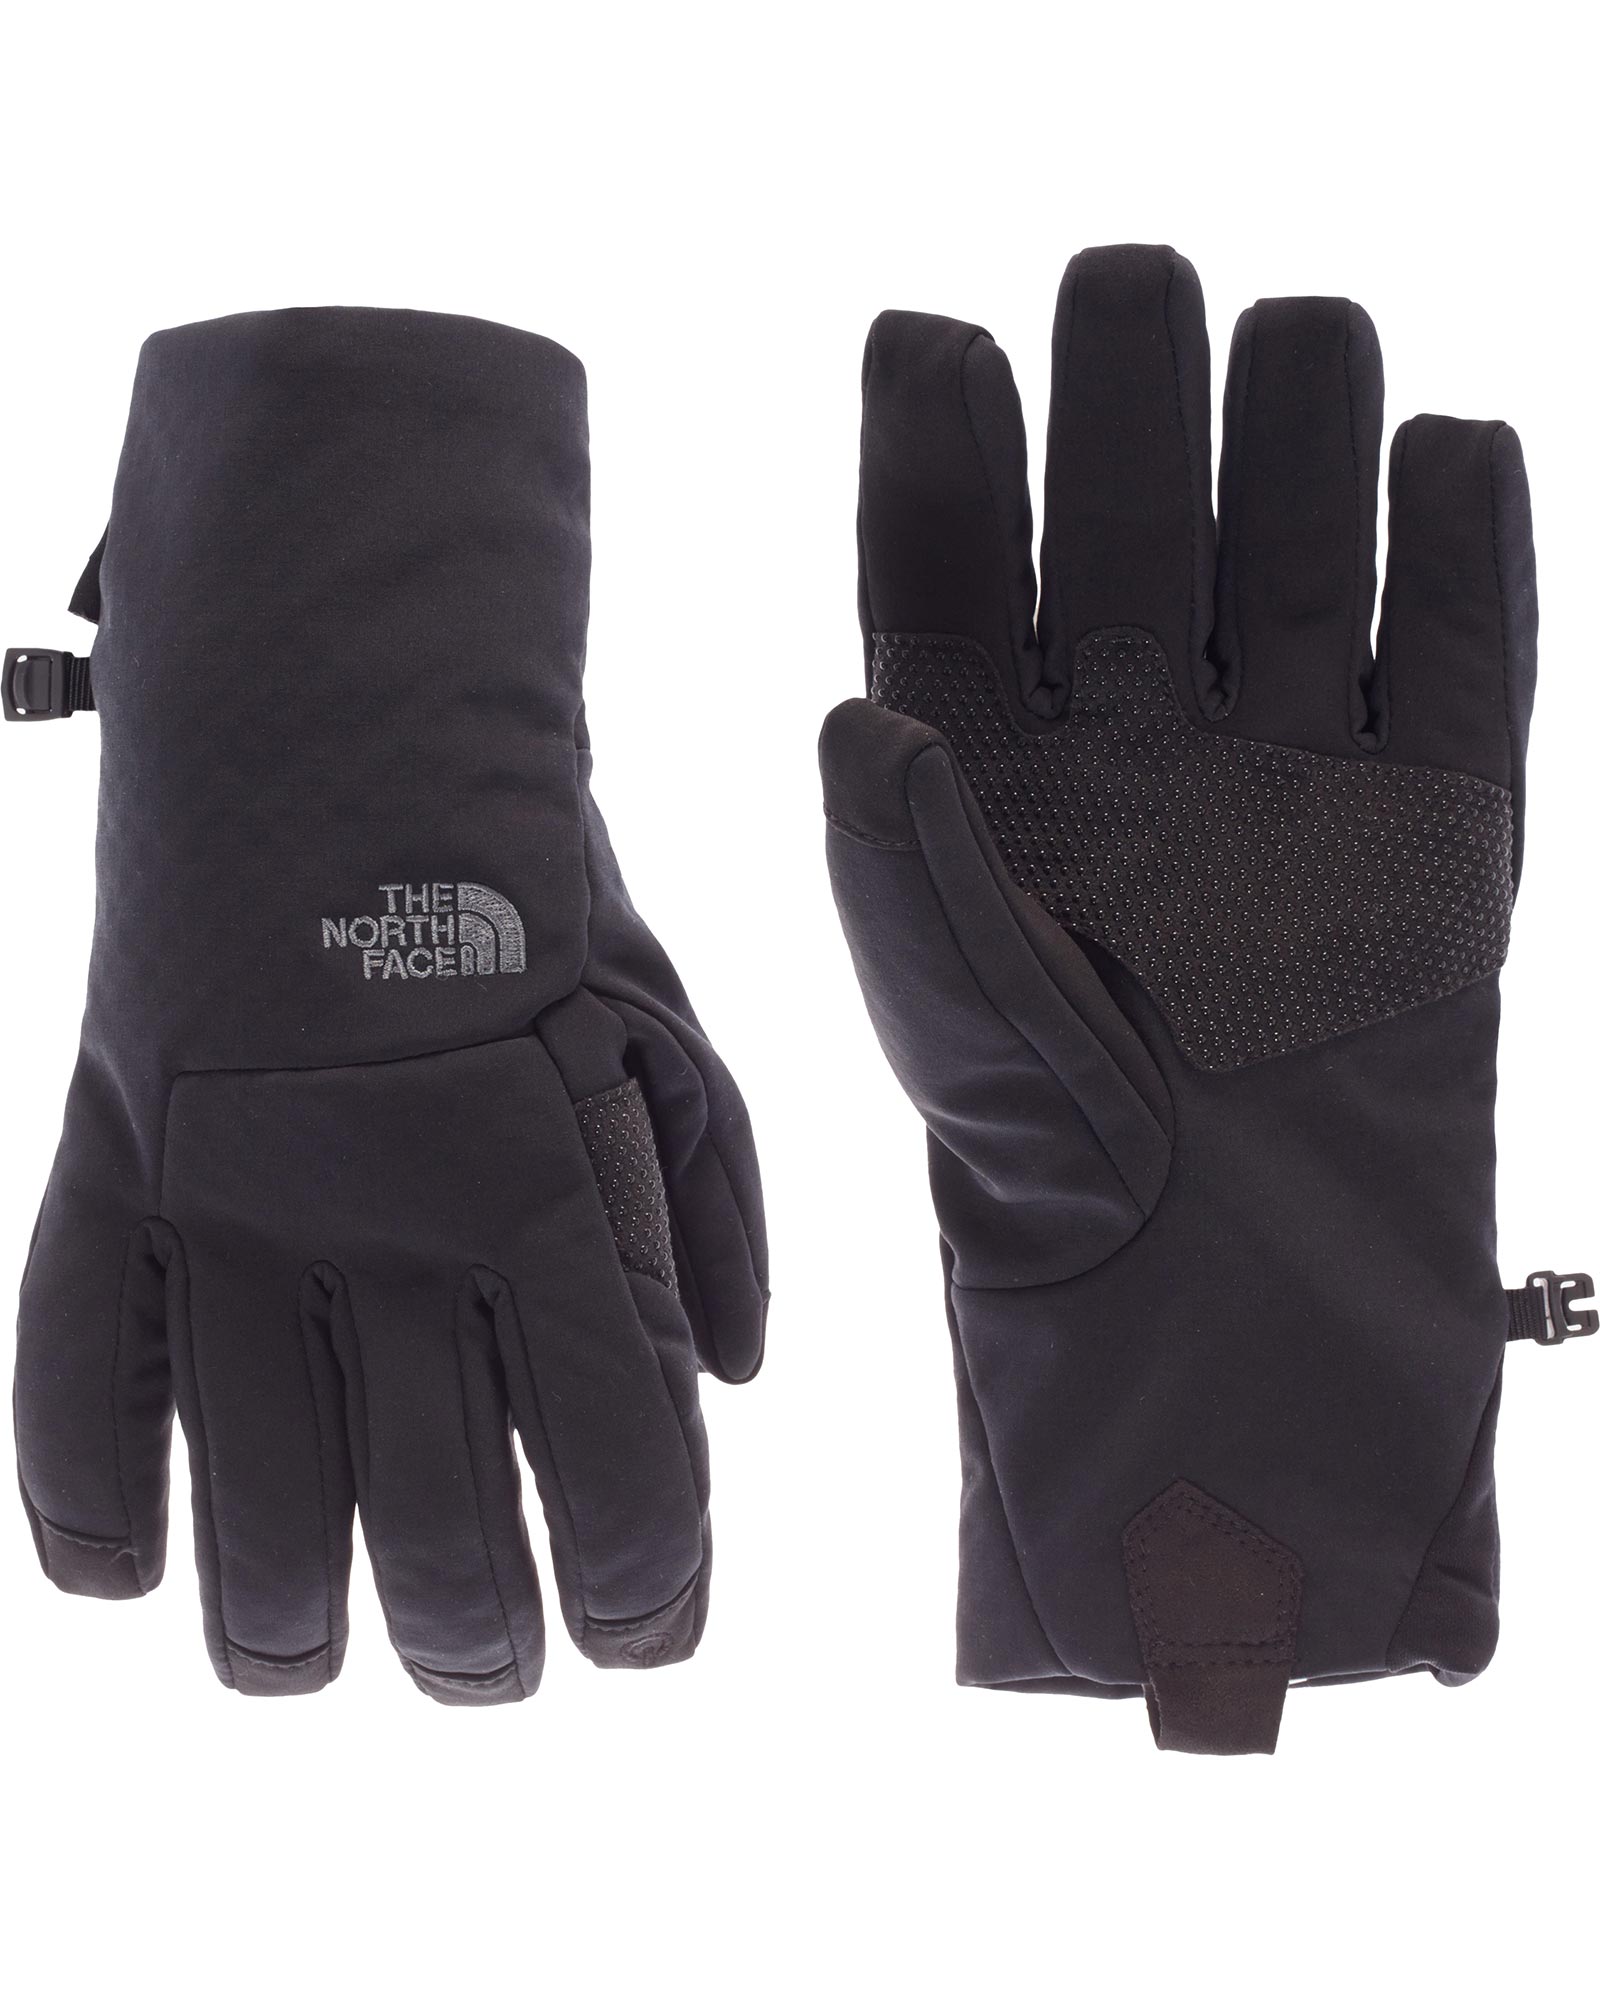 The North Face Apex+ Etip Womens Gloves